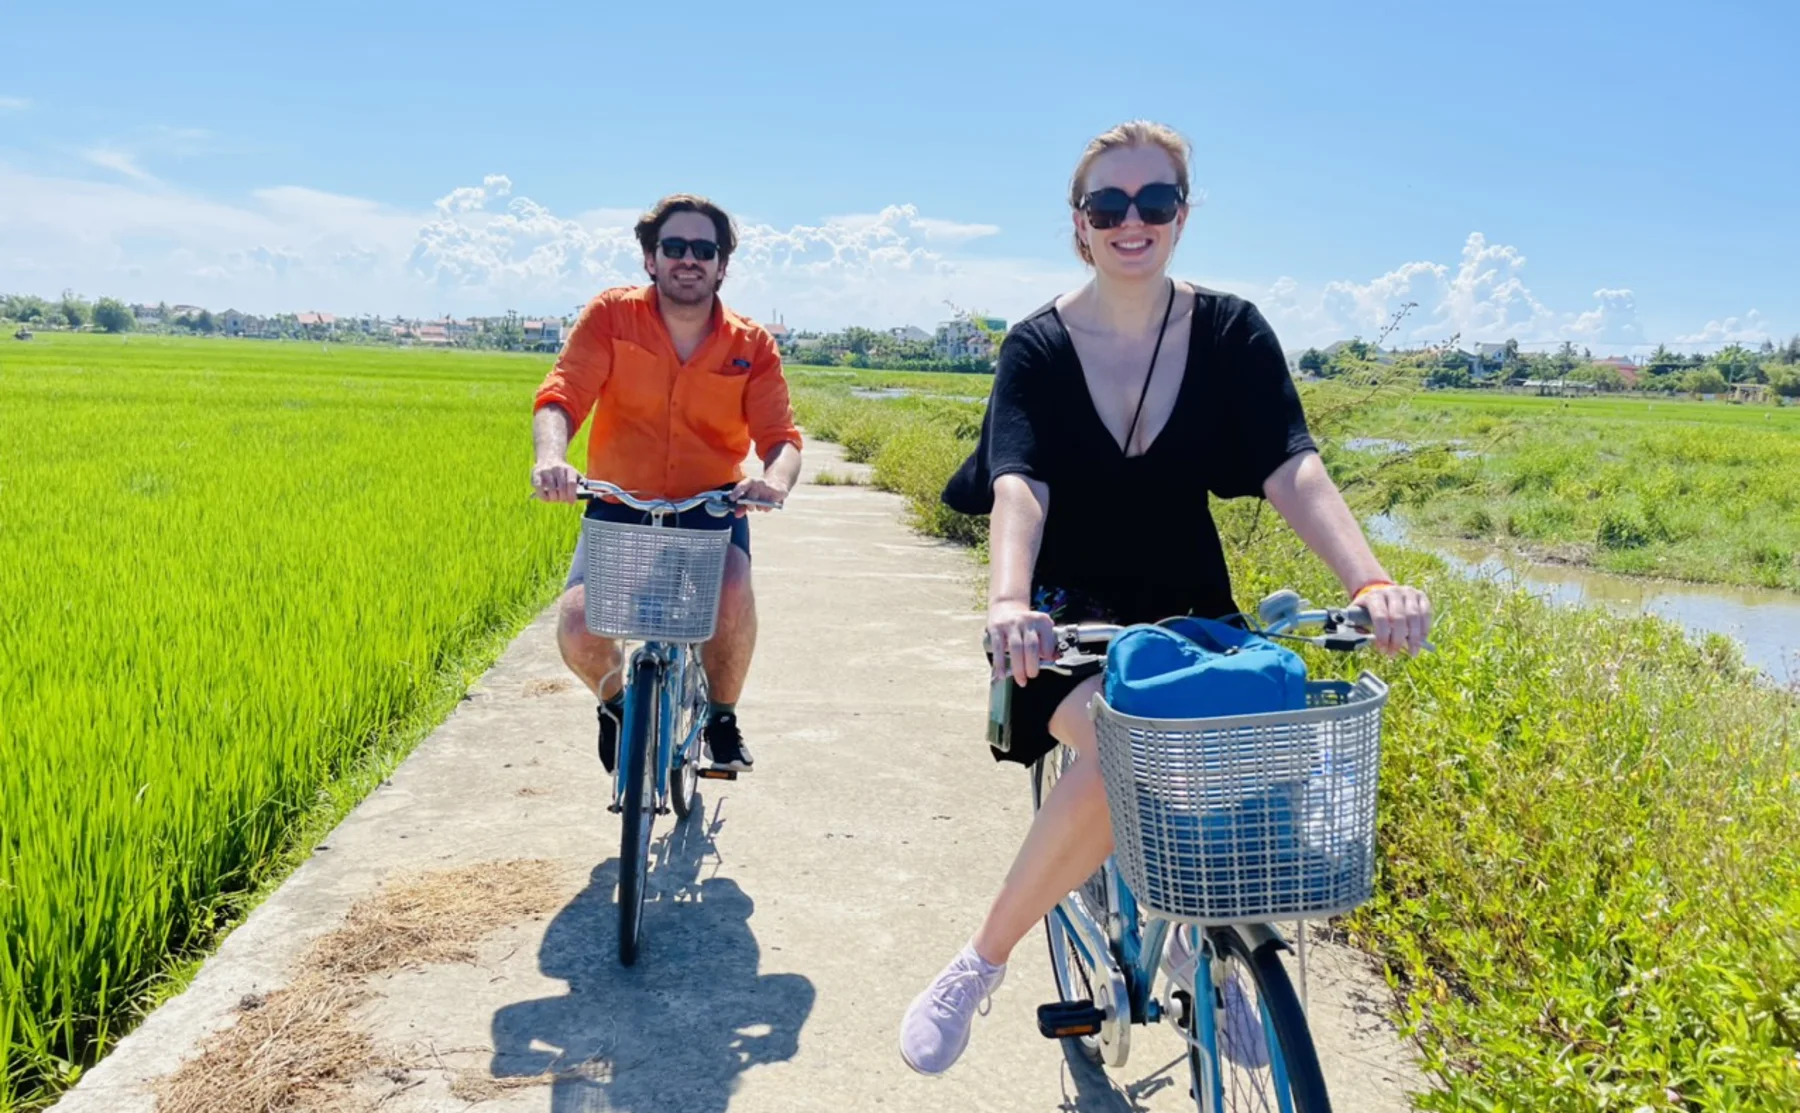 Hoi An Countryside Bike, Buffalo Riding , Basket Boat with Meal - 1478262